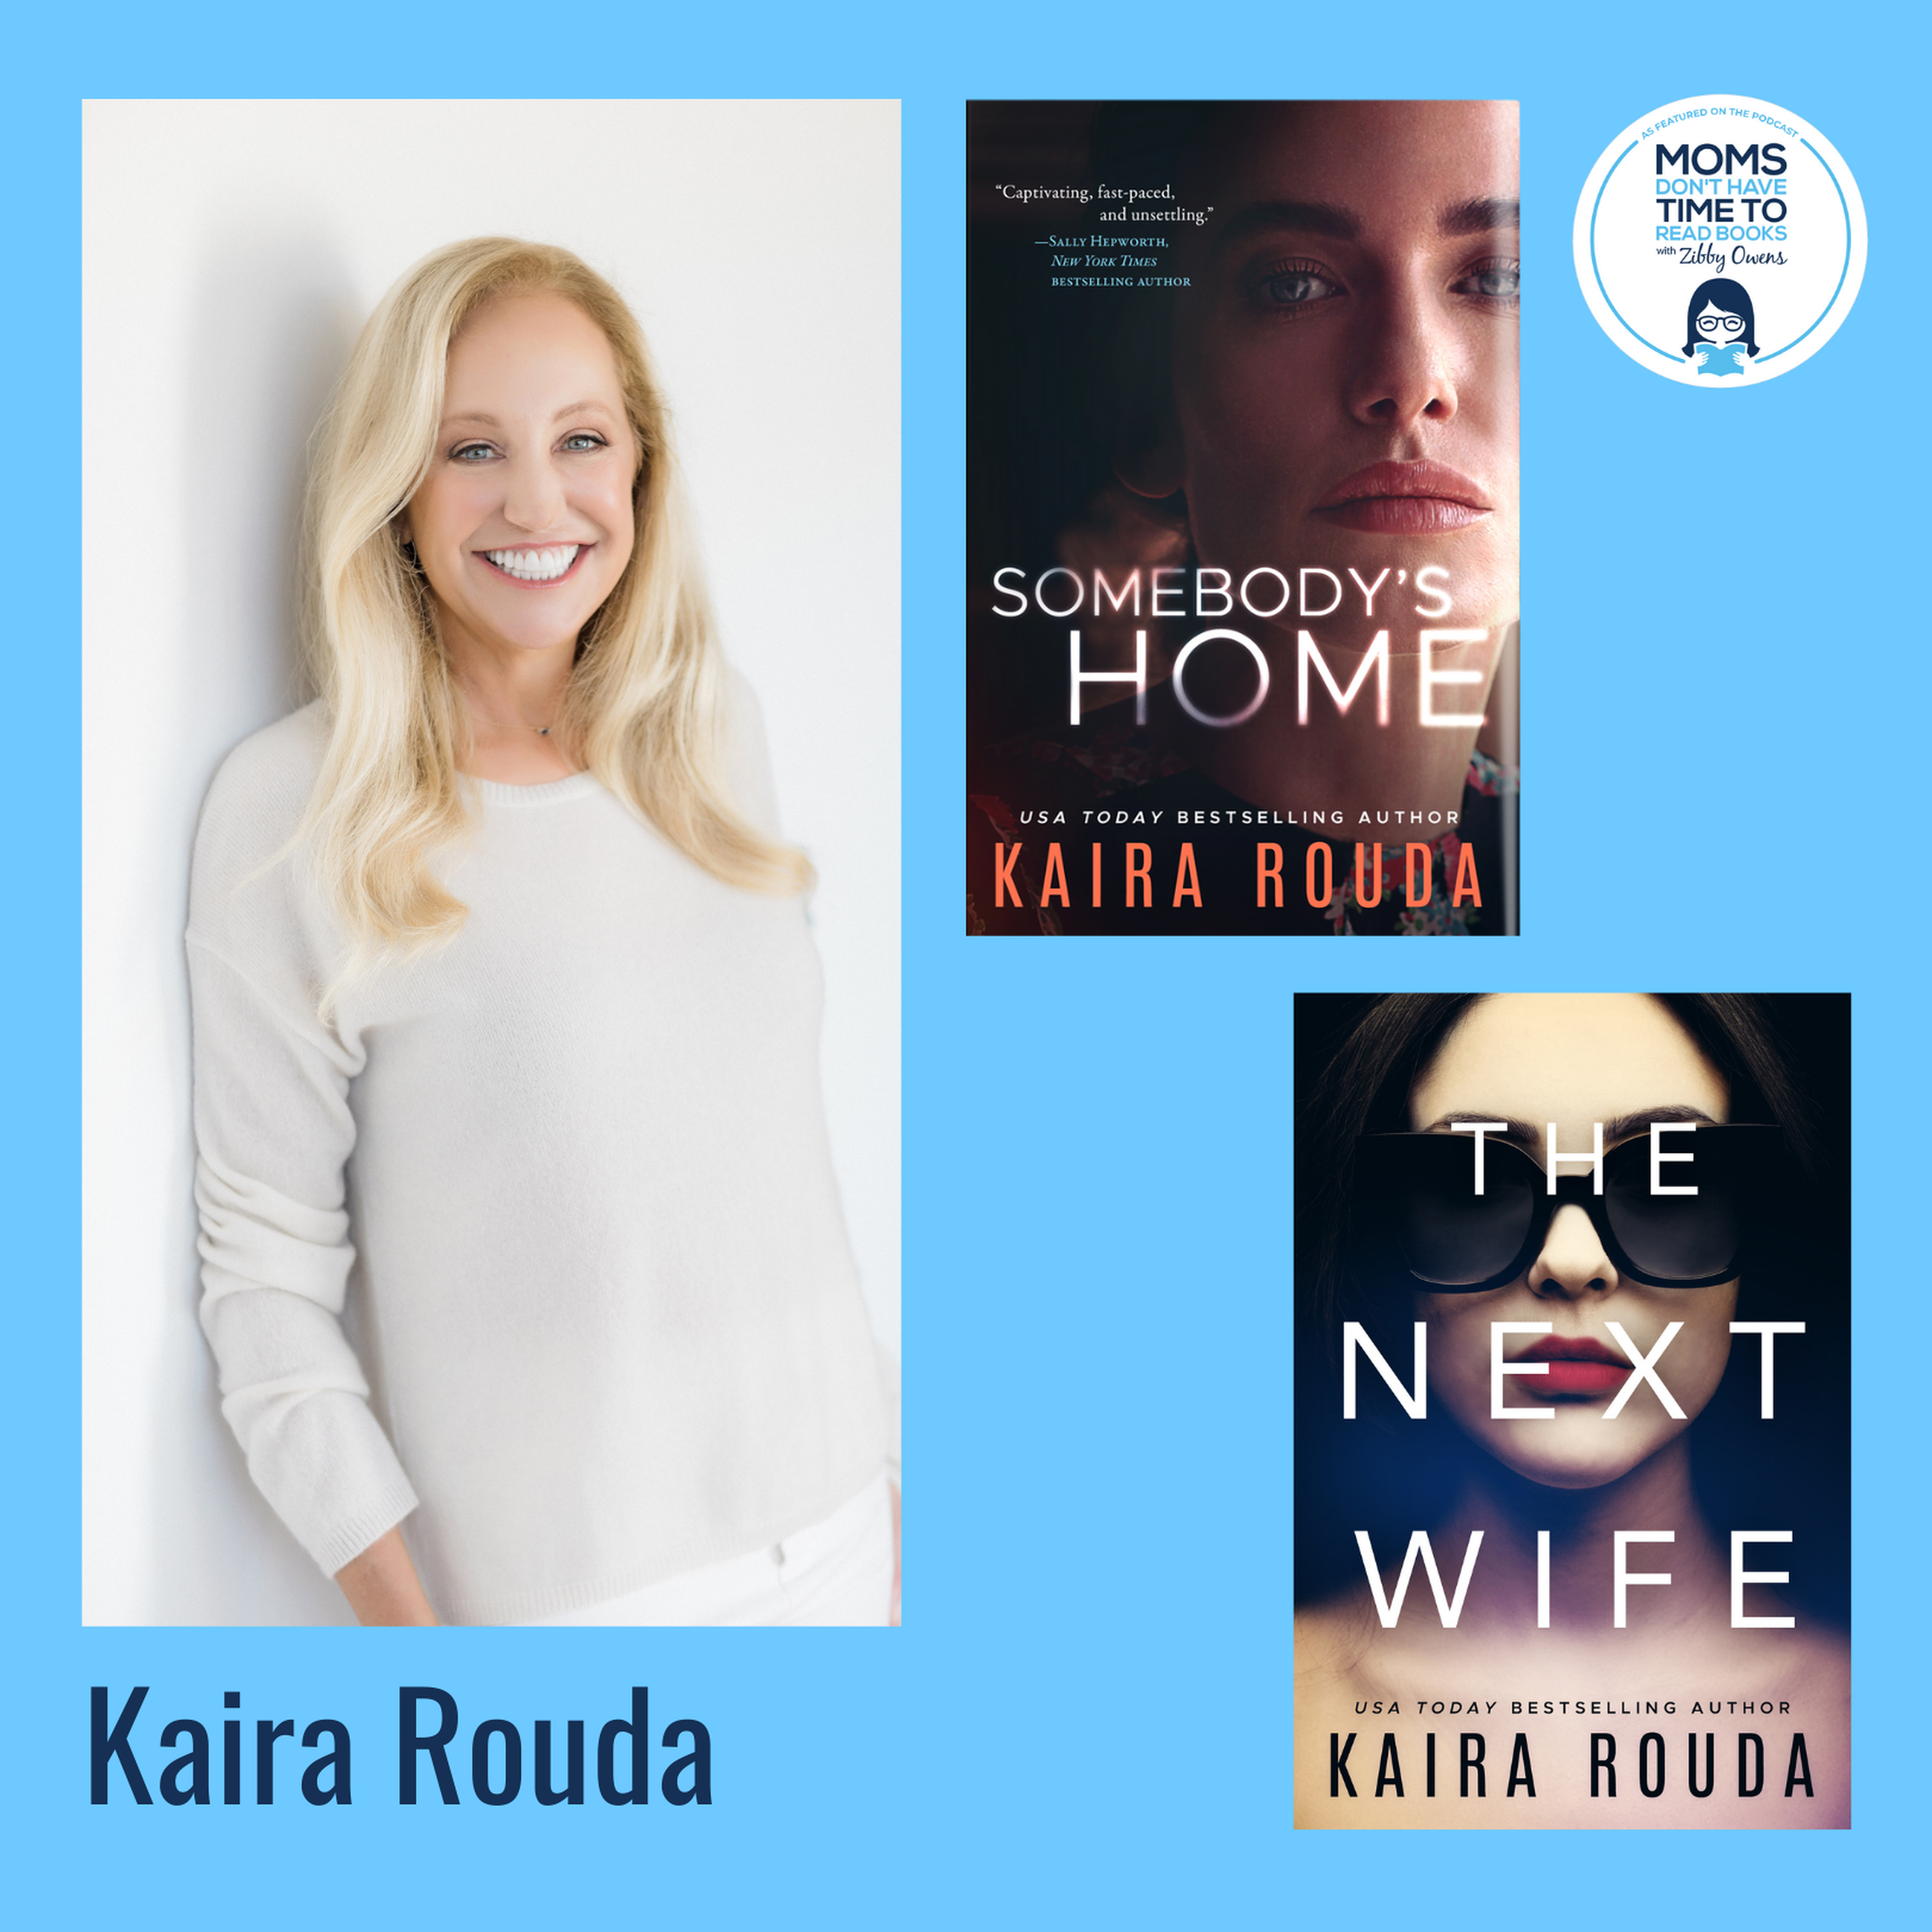 Kaira Rouda, THE NEXT WIFE and SOMEBODY'S HOME